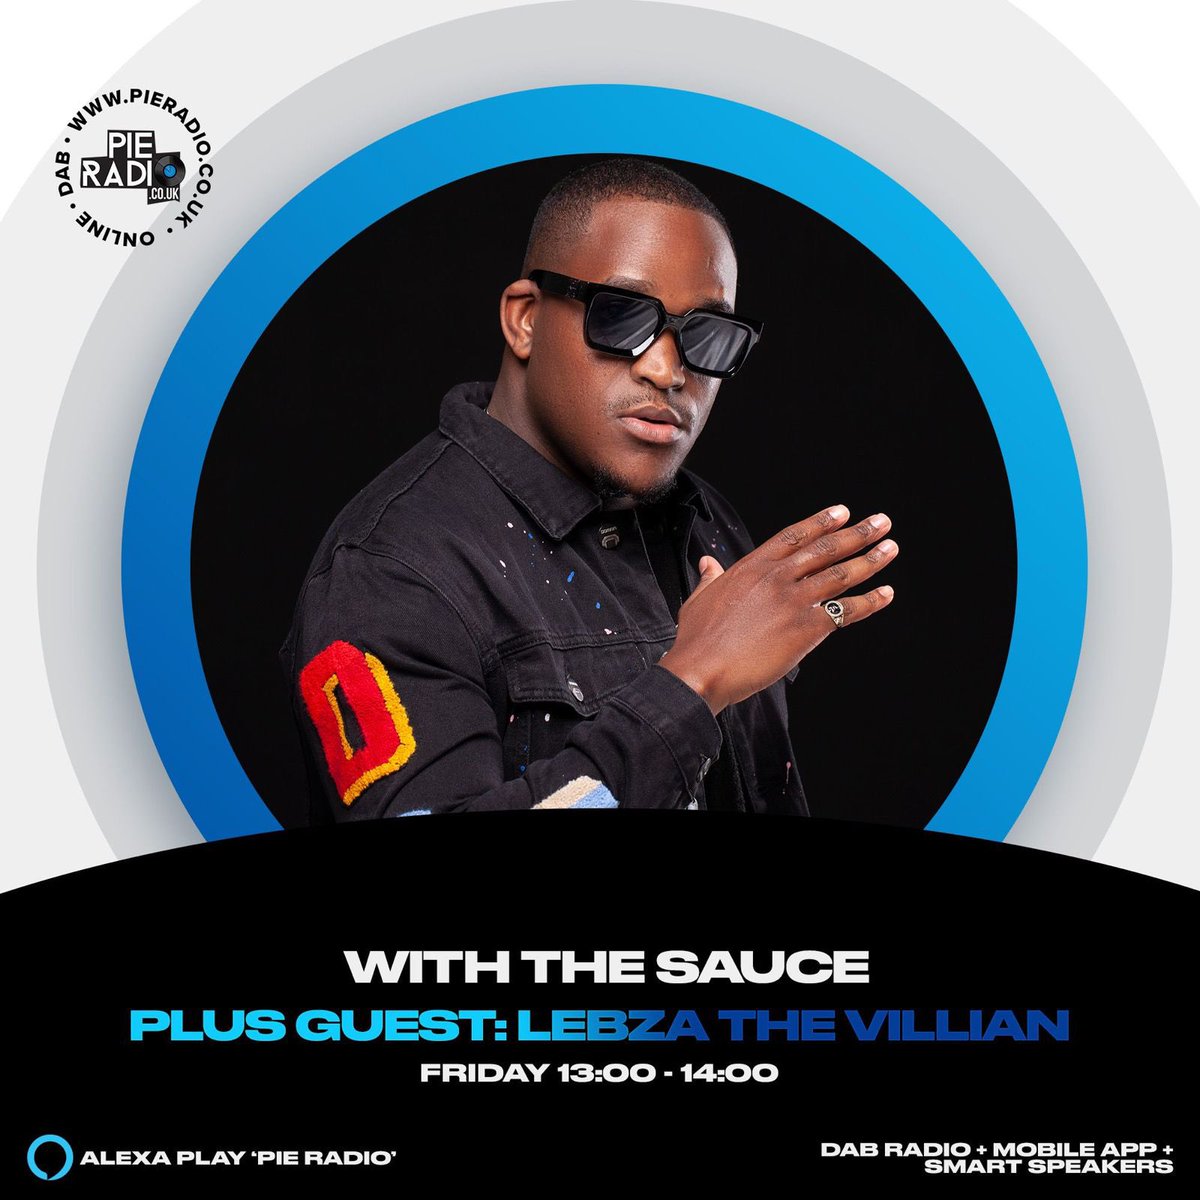 Tune in on Friday for #TheSauce to hear special @lebzathevillain’s guest on @pieradiouk 🇿🇦🇬🇧